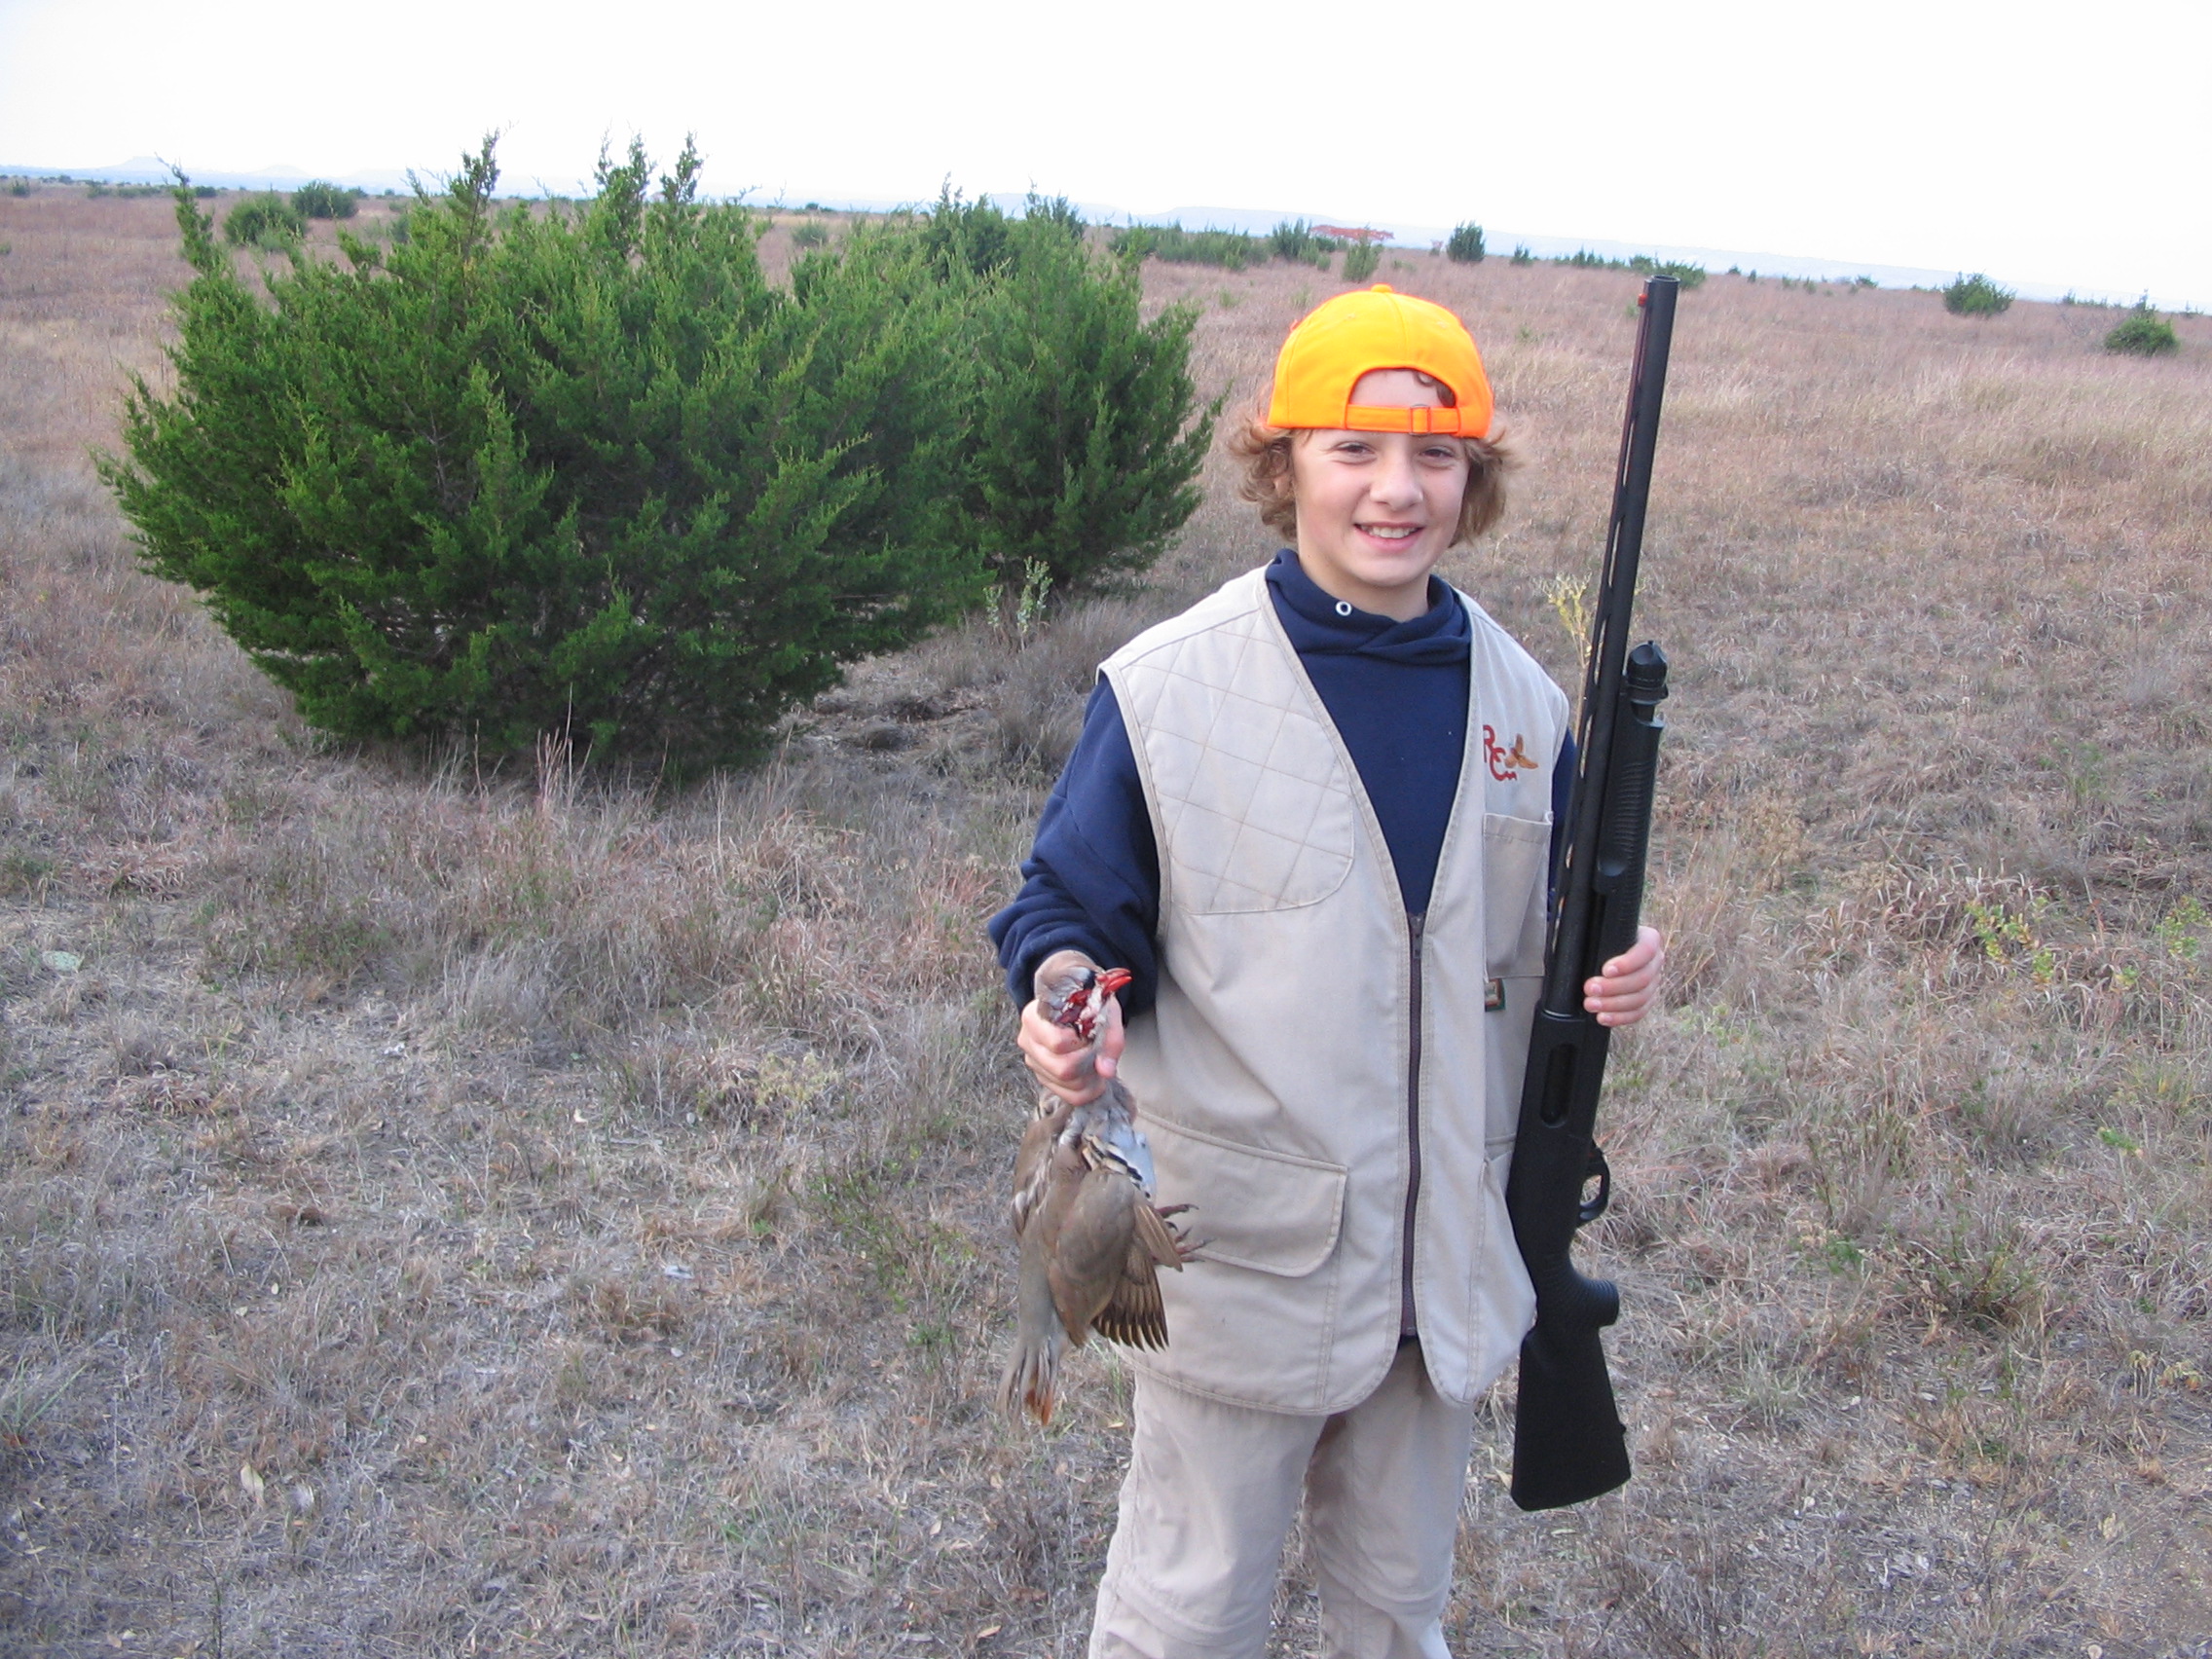 Jacob with pheasant he just shot